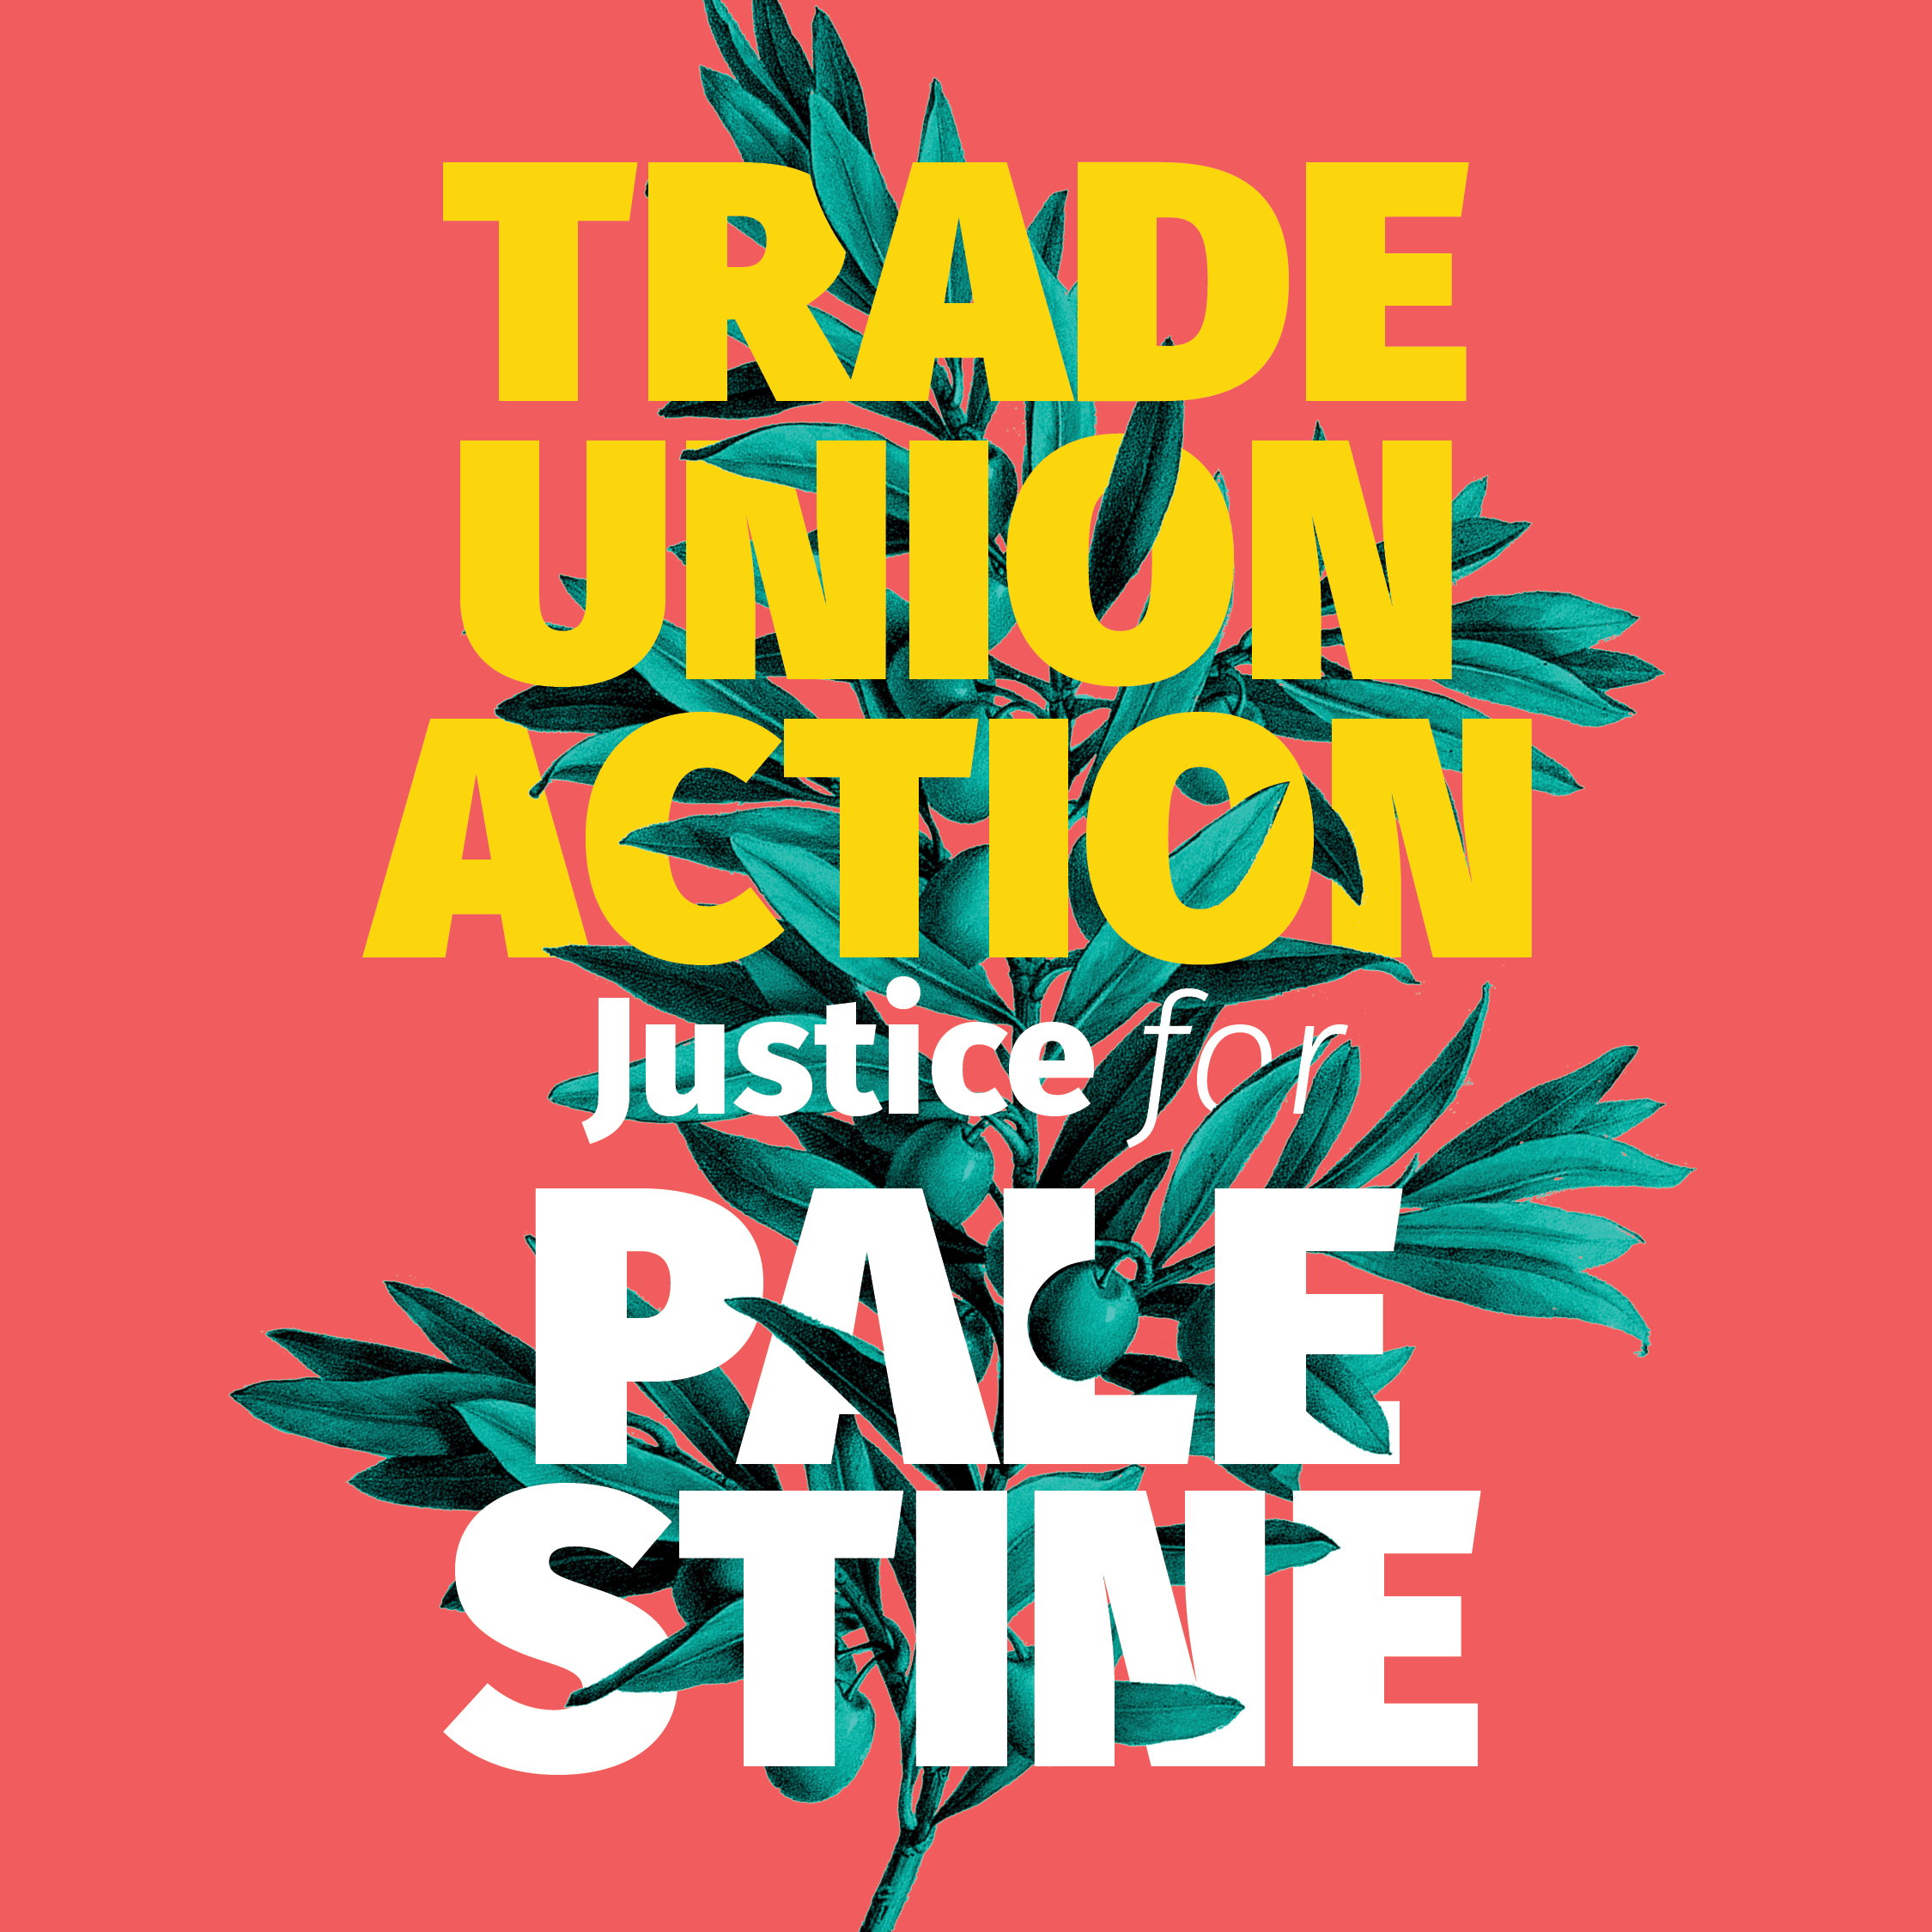 Palestinian Trade Unions call for immediate and urgent action from international Trade Unions